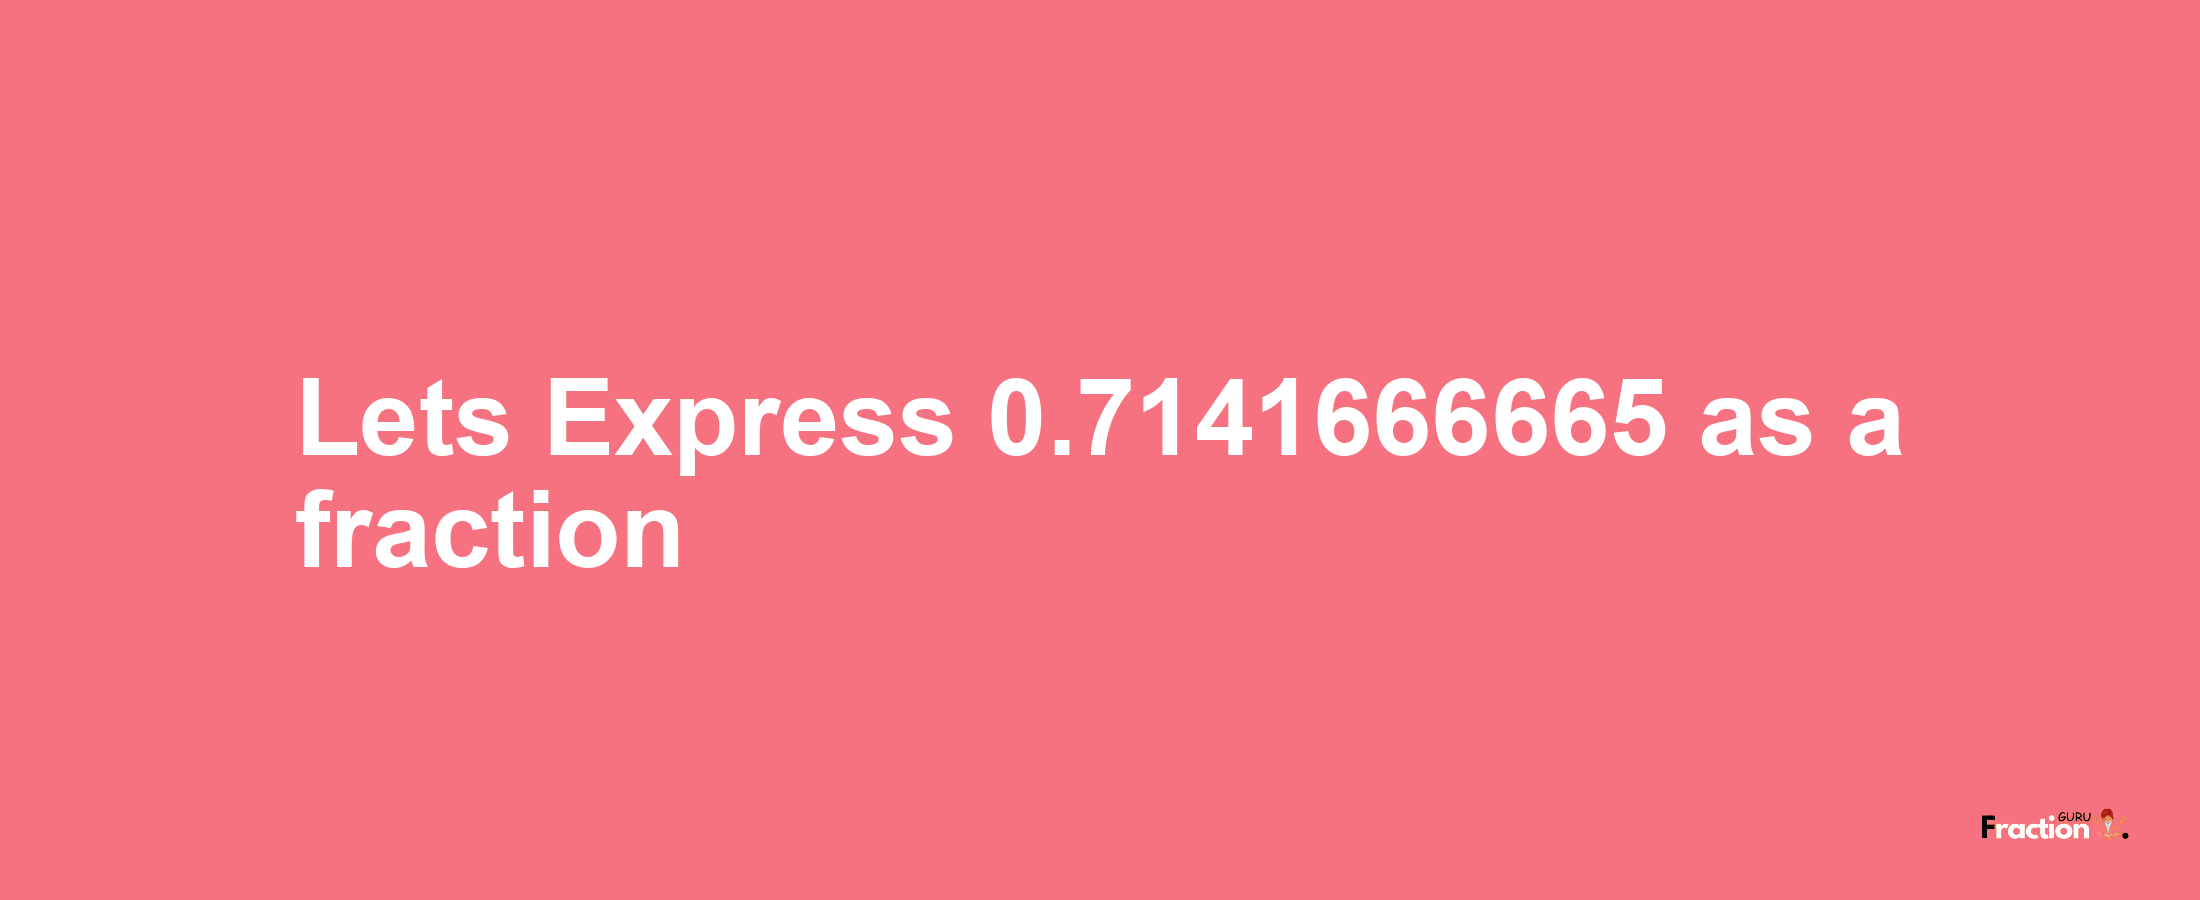 Lets Express 0.7141666665 as afraction